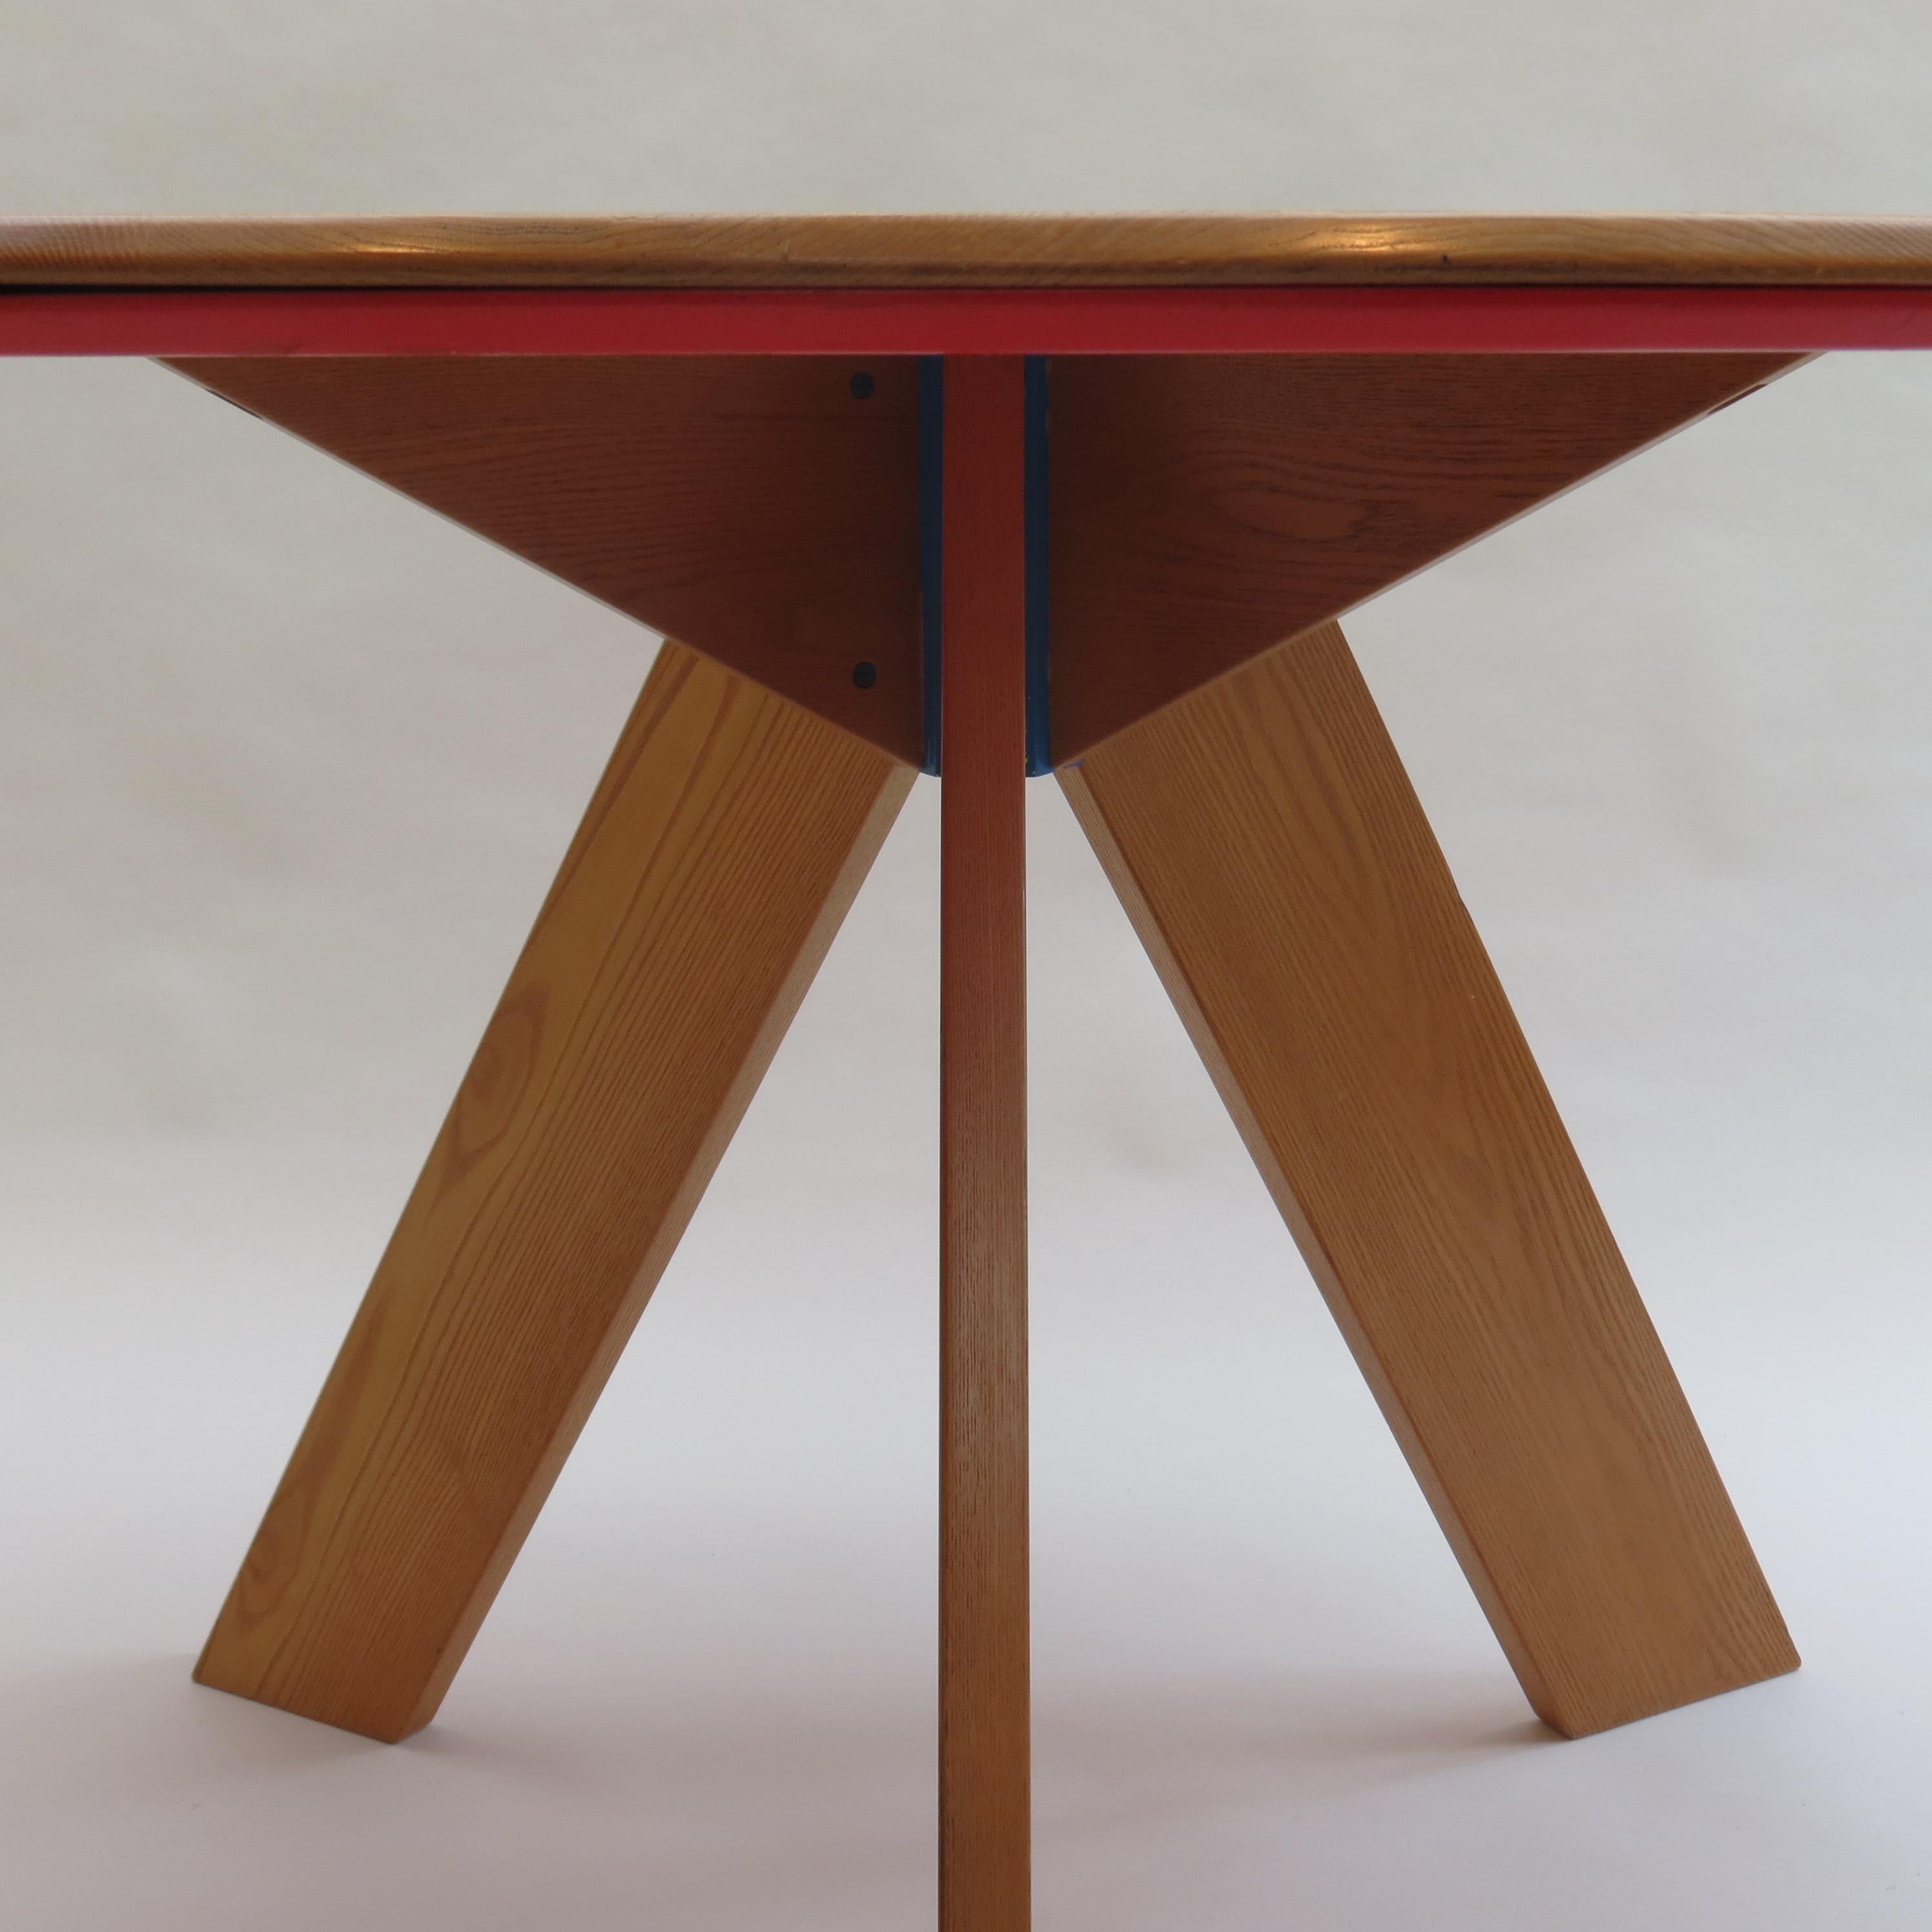 Midcentury Bespoke Circular Ash Dining Table by David Field 1980s with Red Blue 3